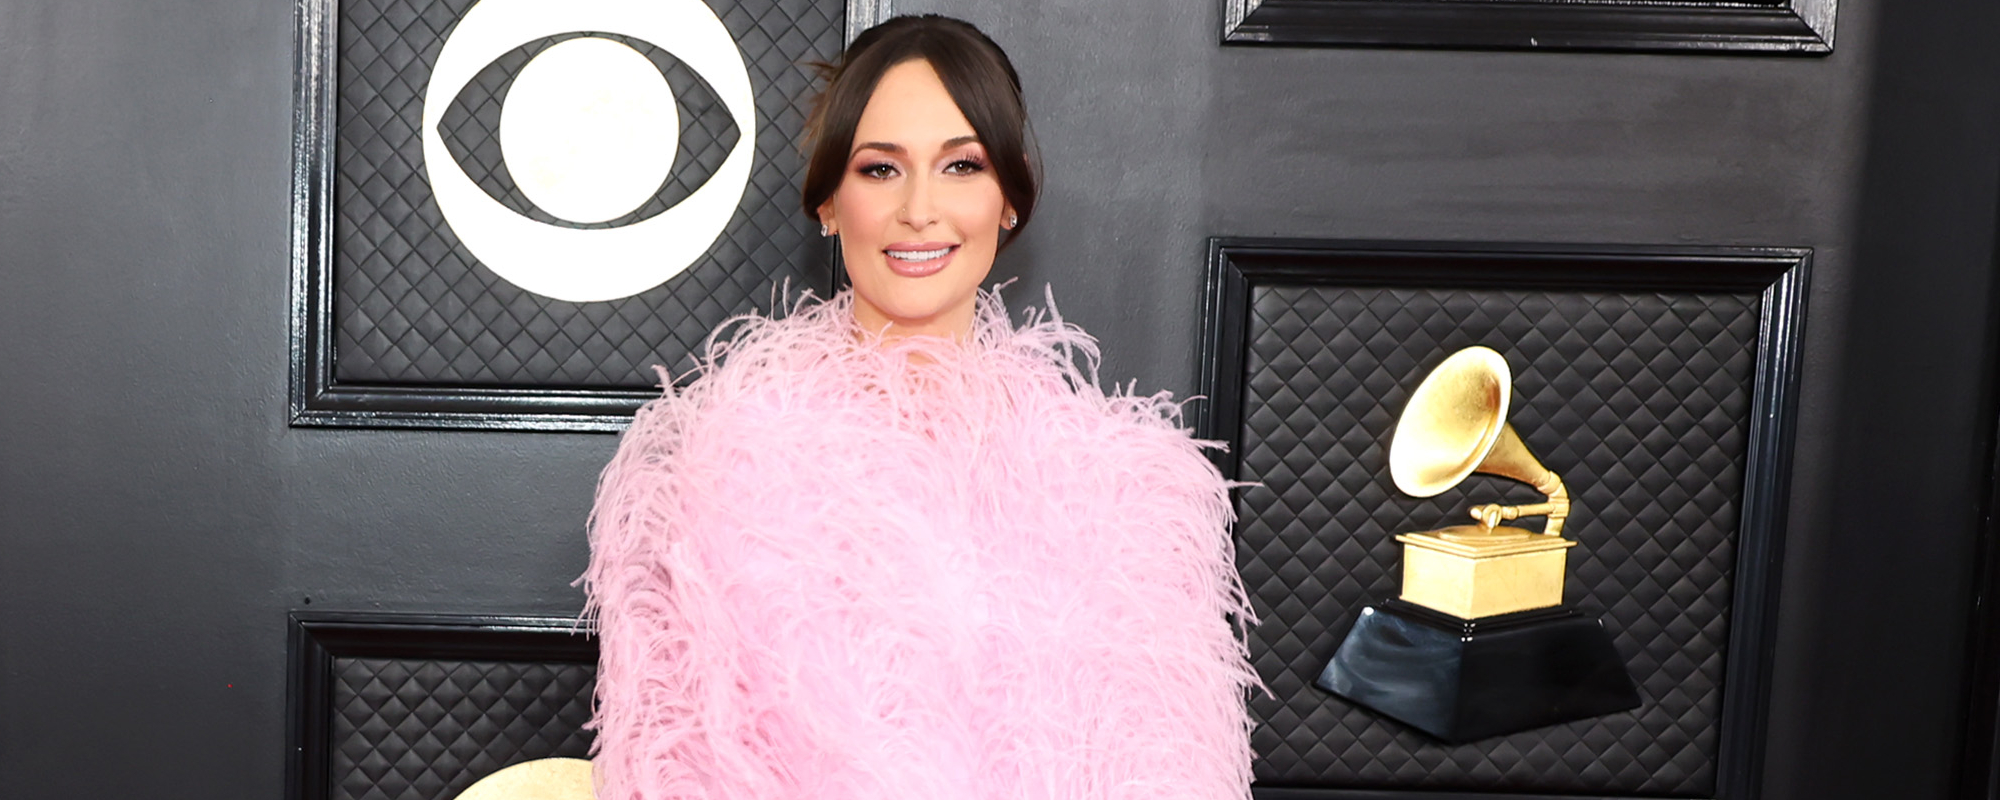 Listen to Kacey Musgraves Perform Bob Marley’s “Three Little Birds” for New Biopic Soundtrack